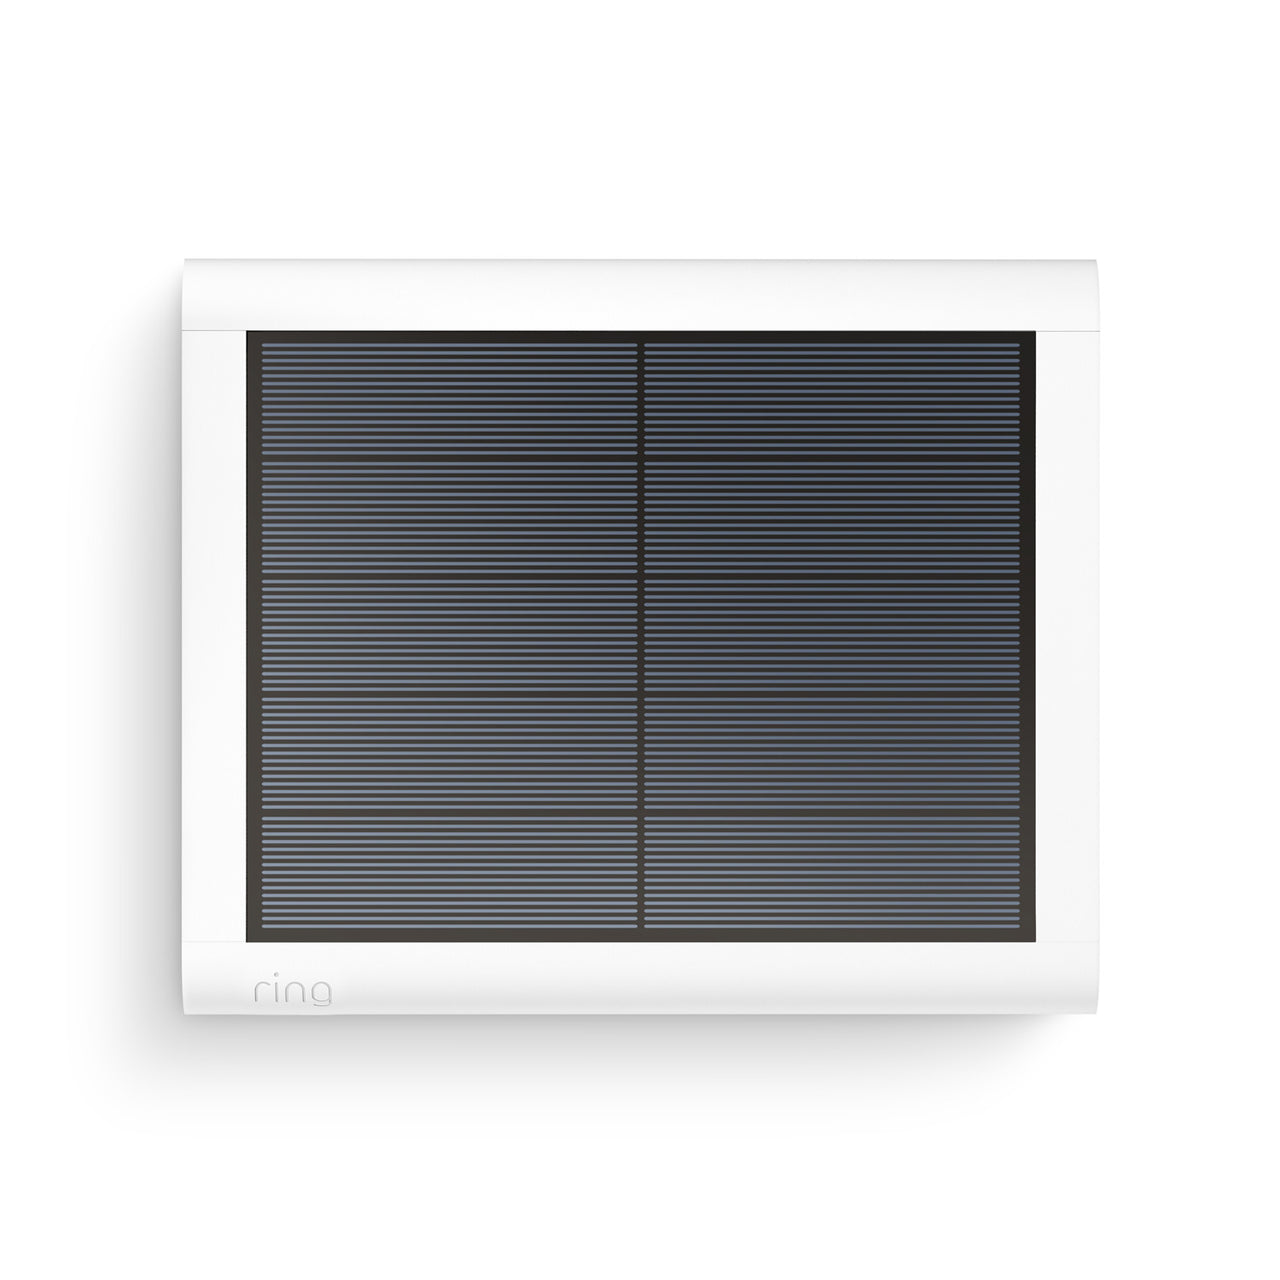 products/ring_solarpanelgen2_wht_front_wall_1500x1500_3a189aa1-1304-4637-830c-adf9947d4175.jpg